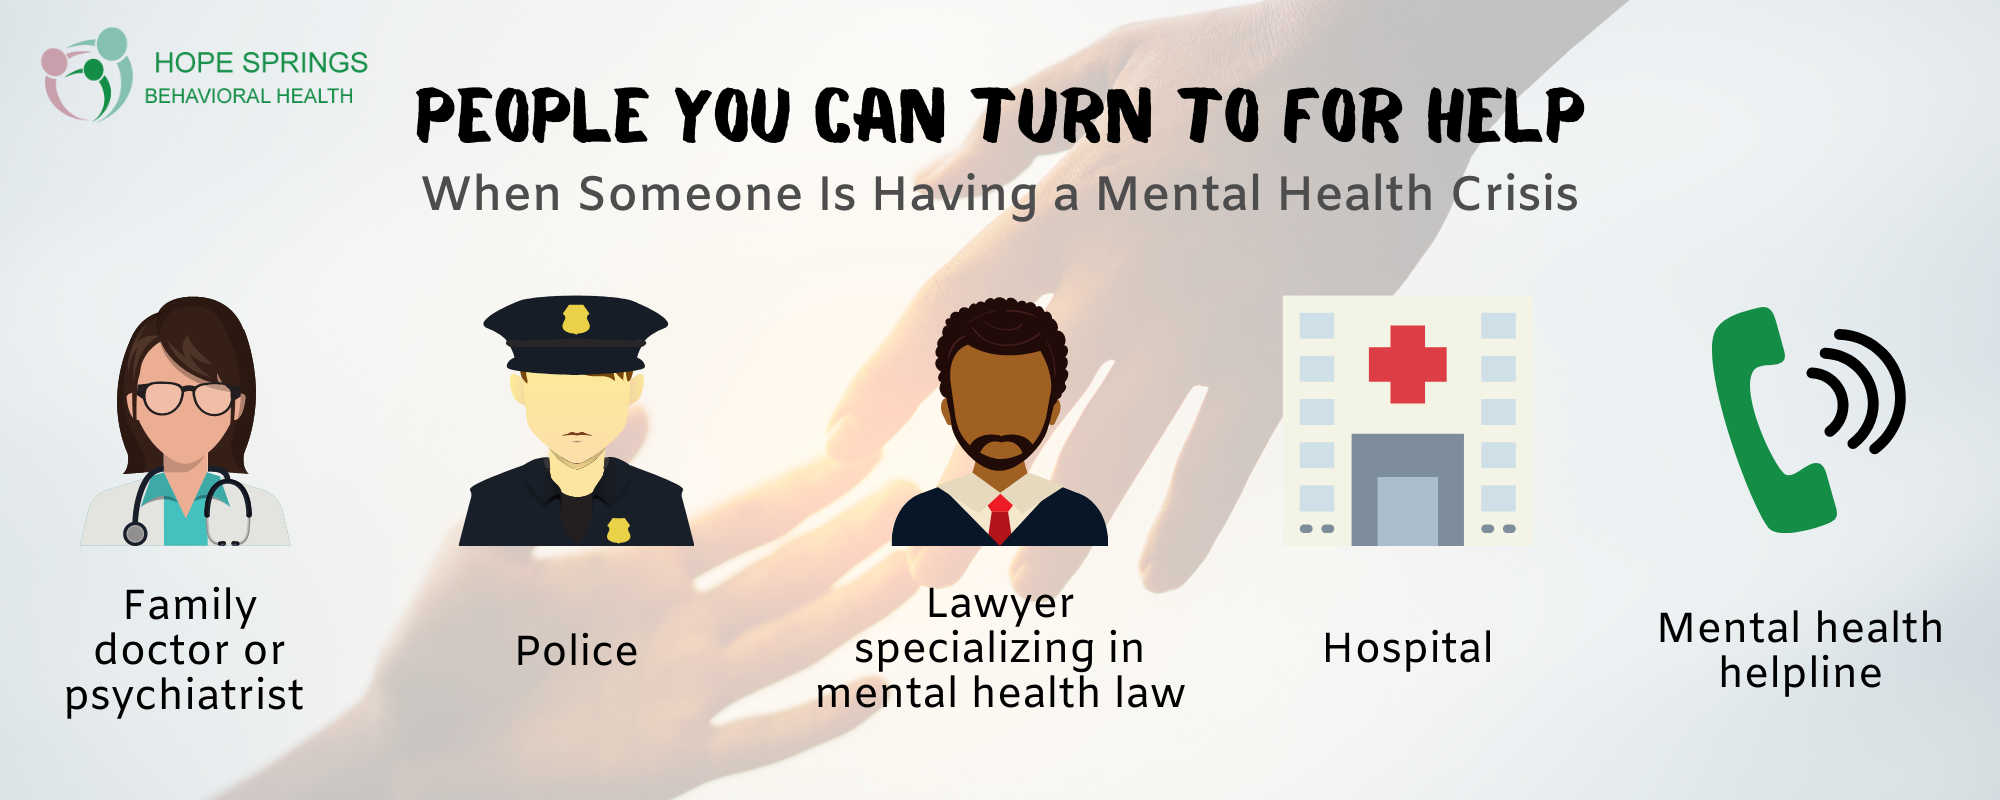 Infographic displaying who to turn to when someone is having a mental health crisis